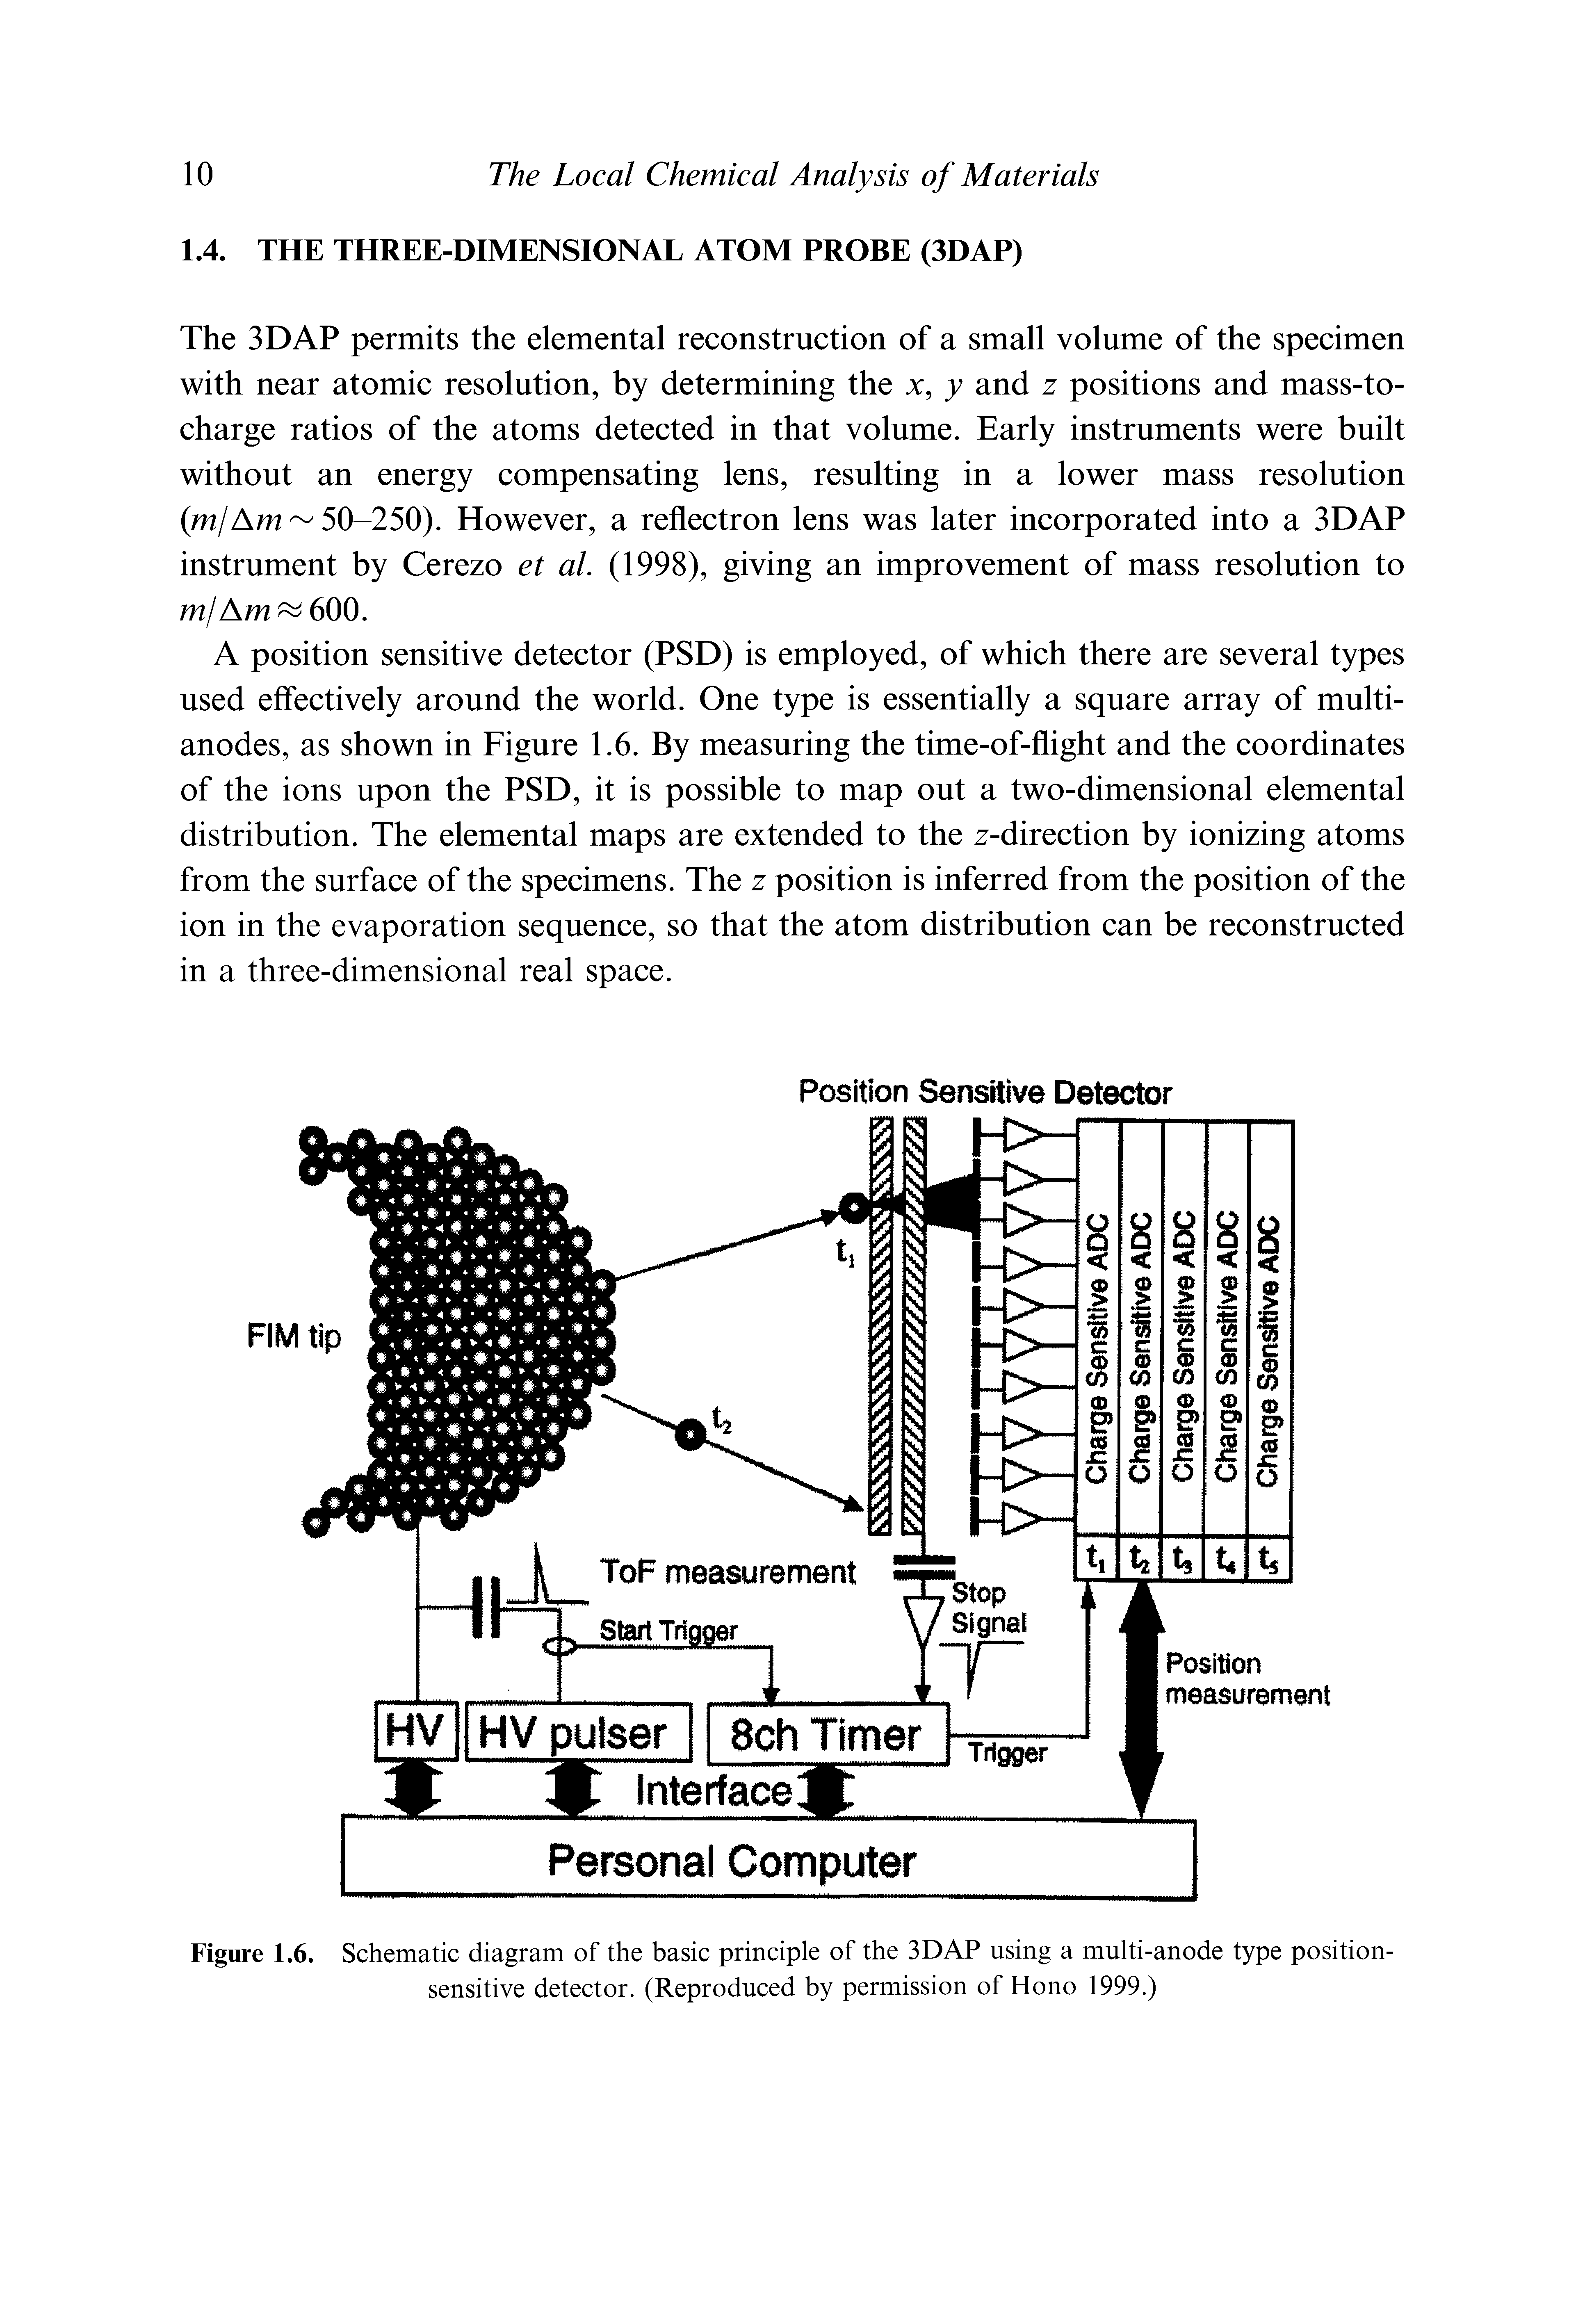 Figure 1.6. Schematic diagram of the basic principle of the 3DAP using a multi-anode type position-sensitive detector. (Reproduced by permission of Hono 1999.)...